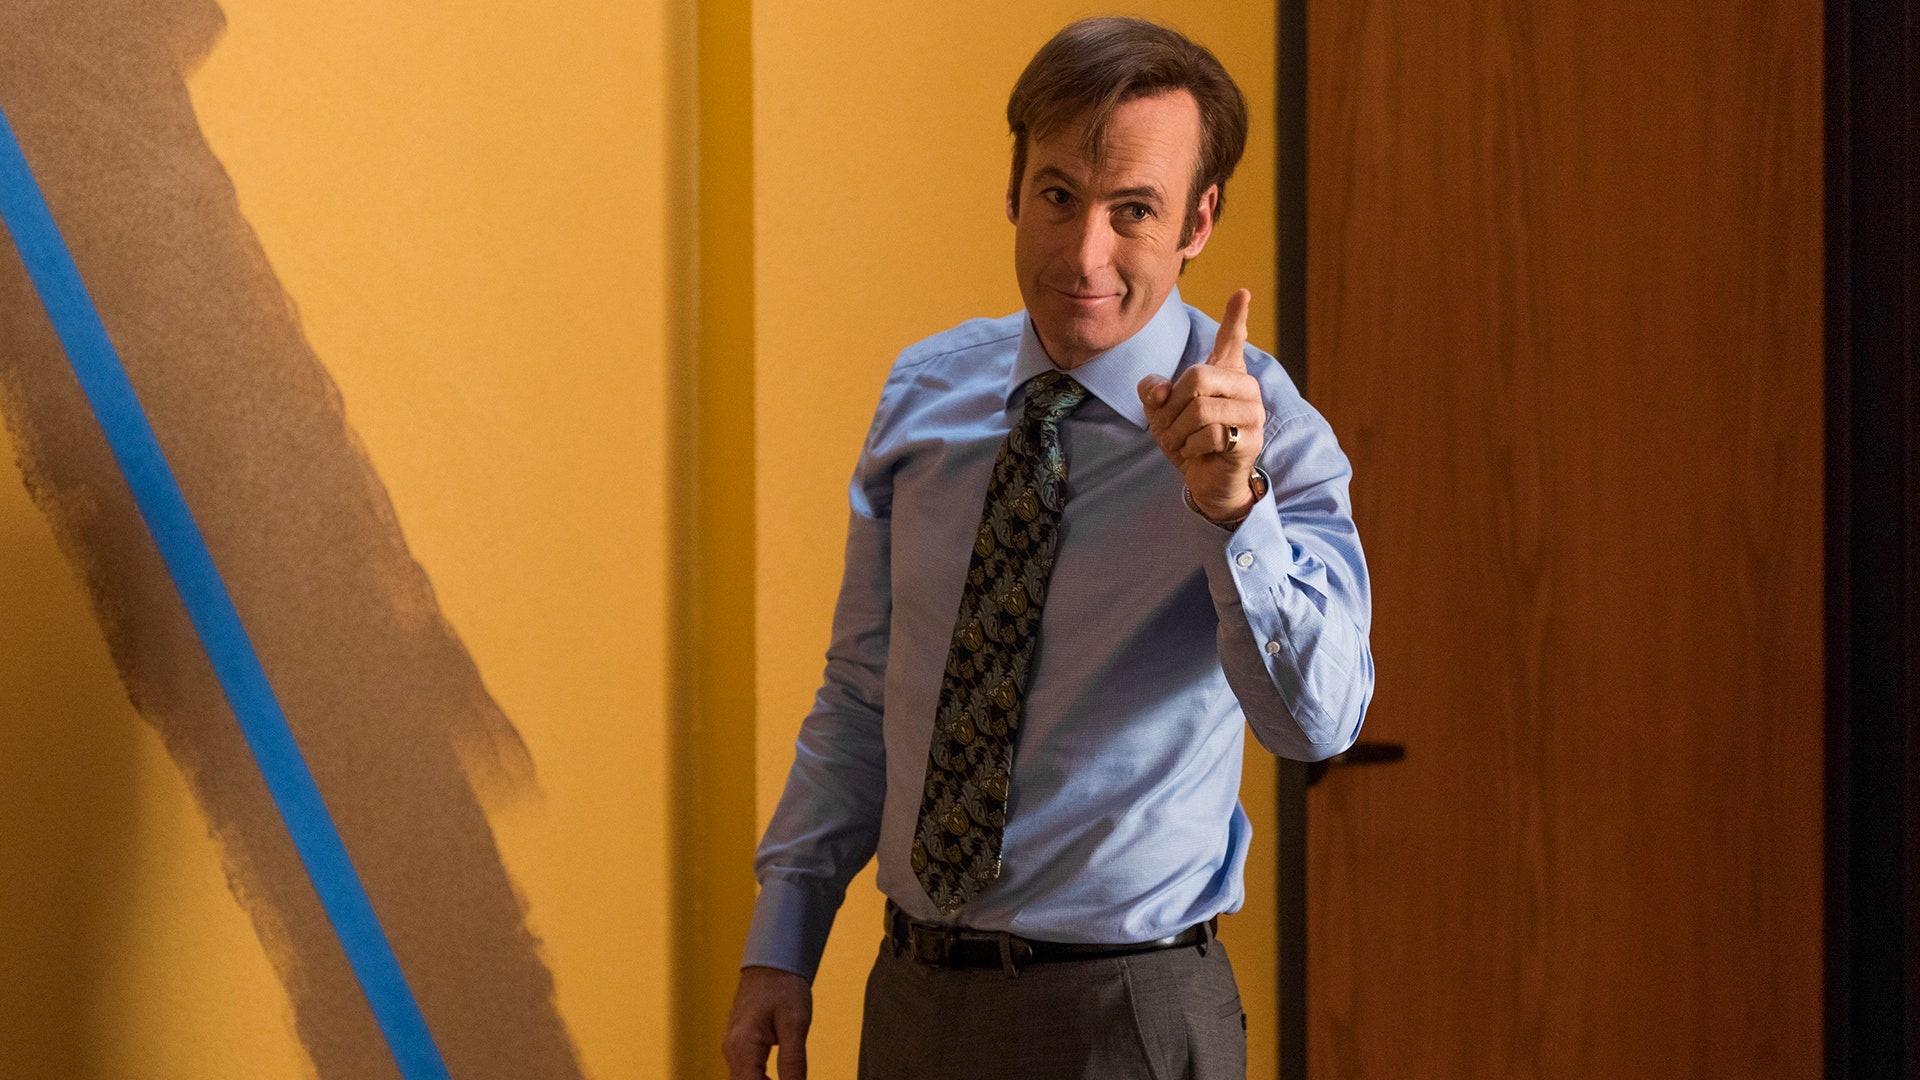 Bob Odenkirk Movies, New movie on streaming, Audiences are loving it, 1920x1080 Full HD Desktop